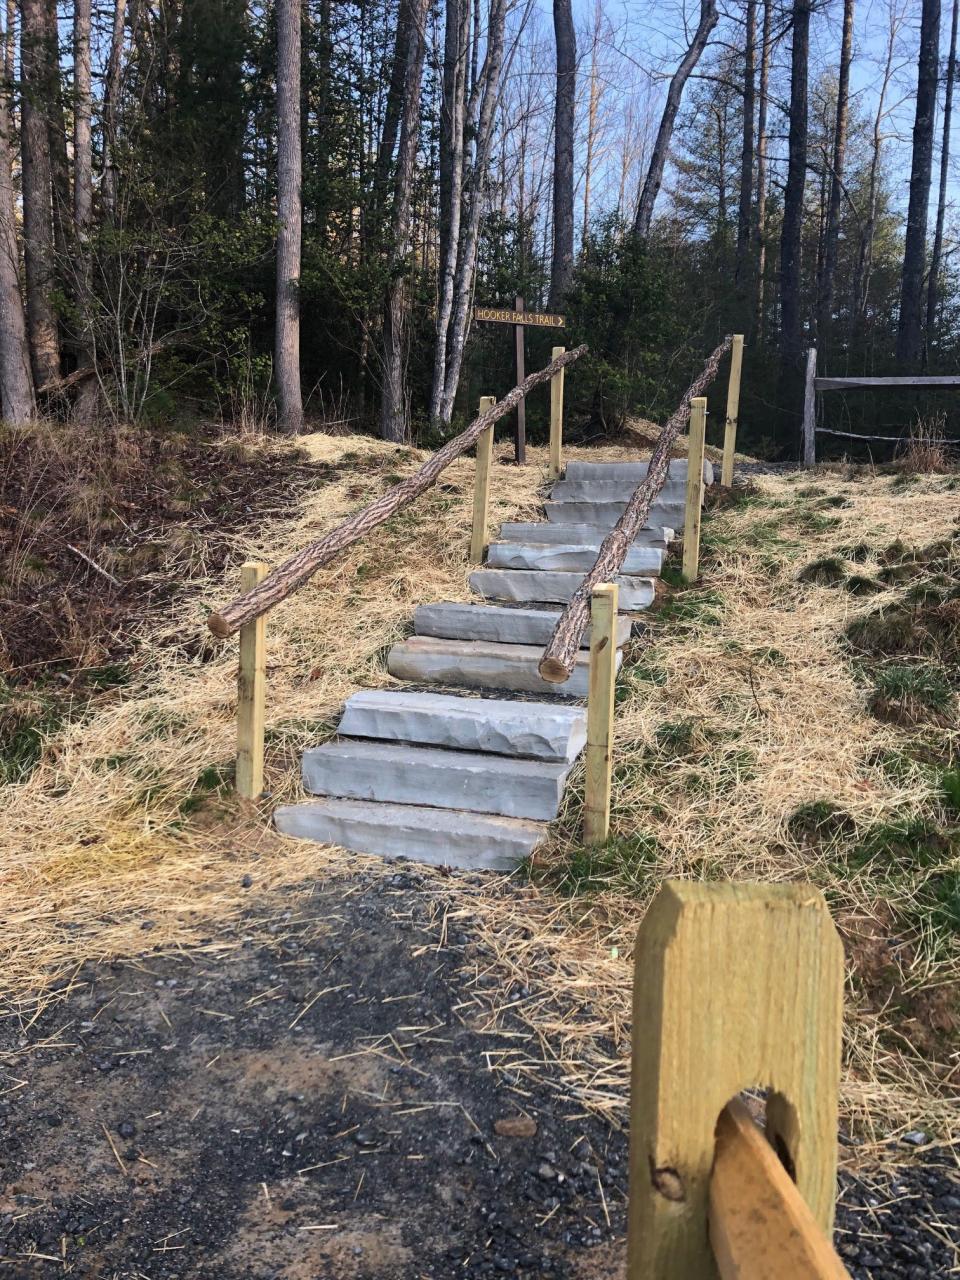 Repairs to damaged stairs, roads and trails at the Hooker Falls parking area in DuPont State Recreational Forest were completed in late February 2021.